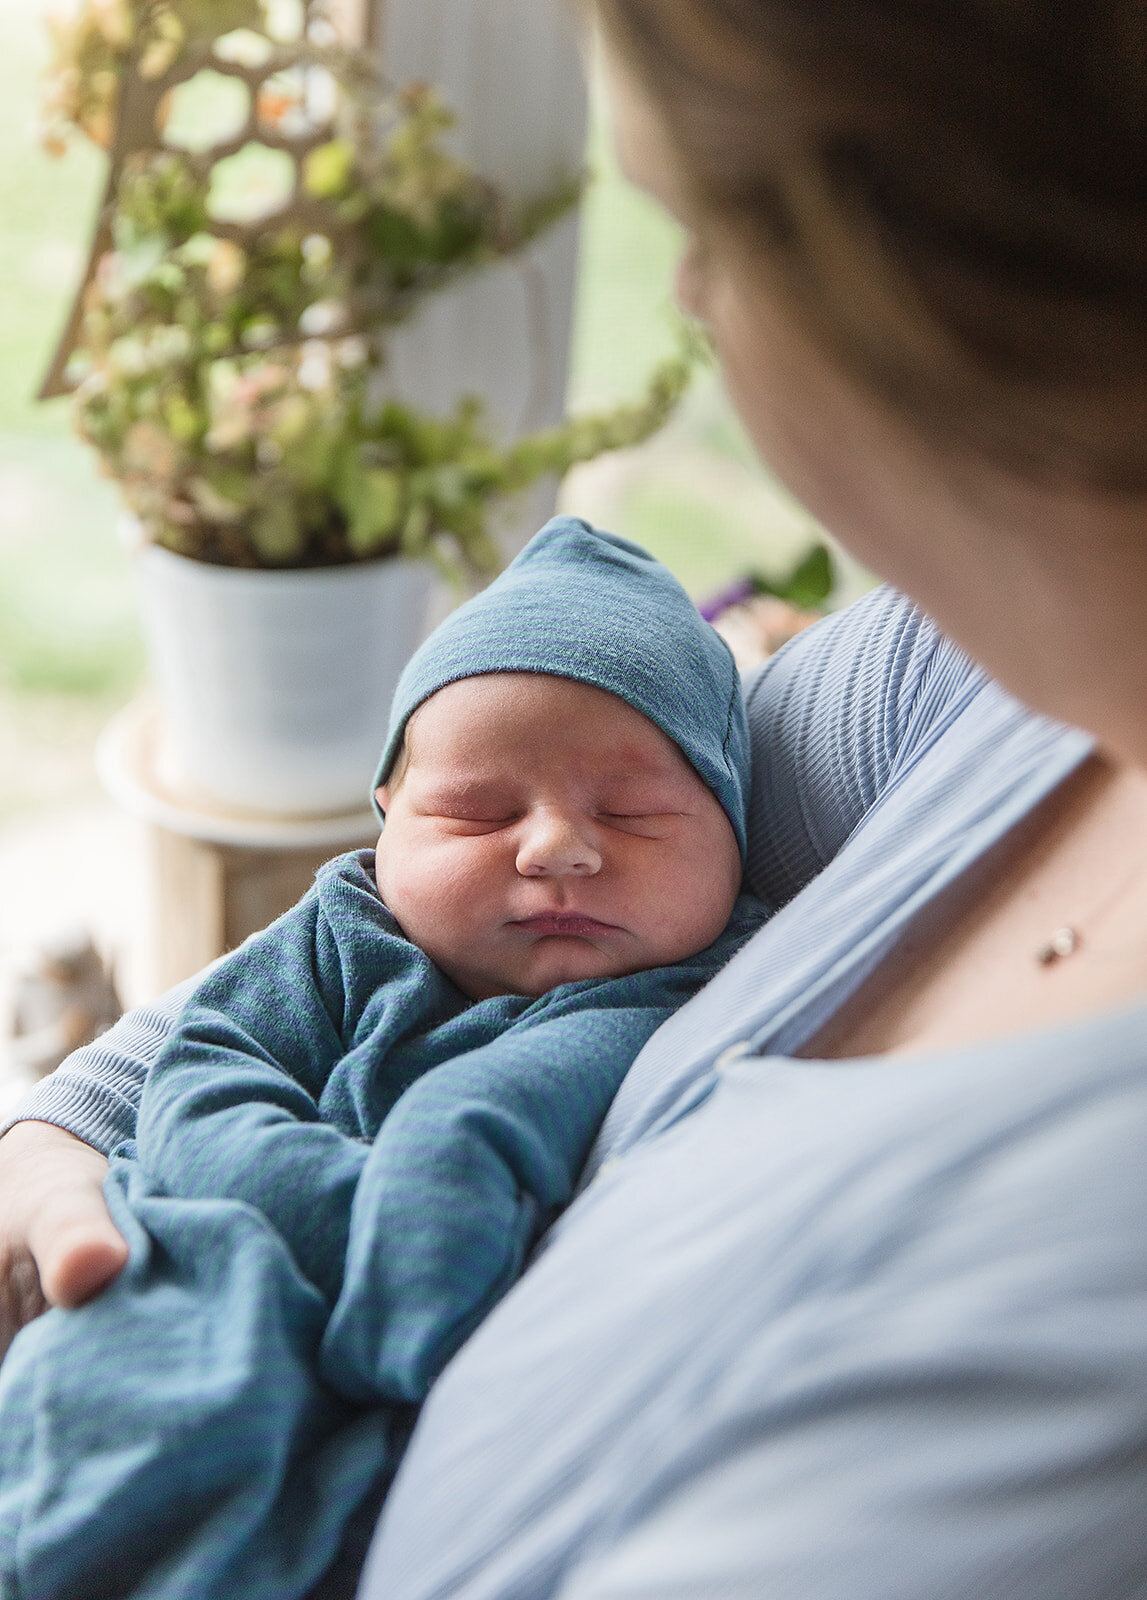 Mom Holds Newborn in Front of Home Window